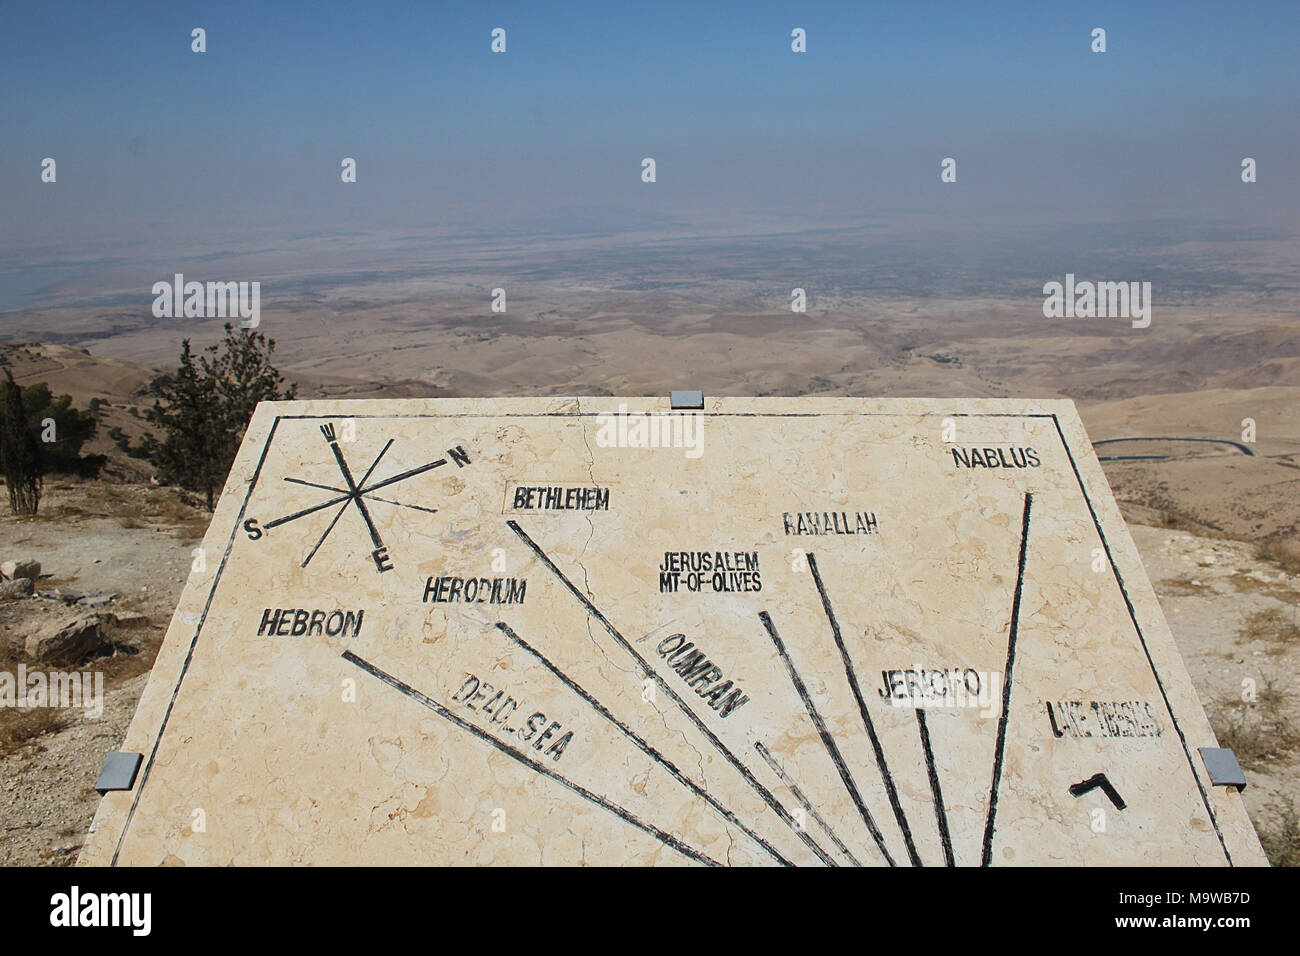 View from Mount Nebo over the surrounding countryside with an orientation table indicating key locations in Israel and Palestine. Stock Photo